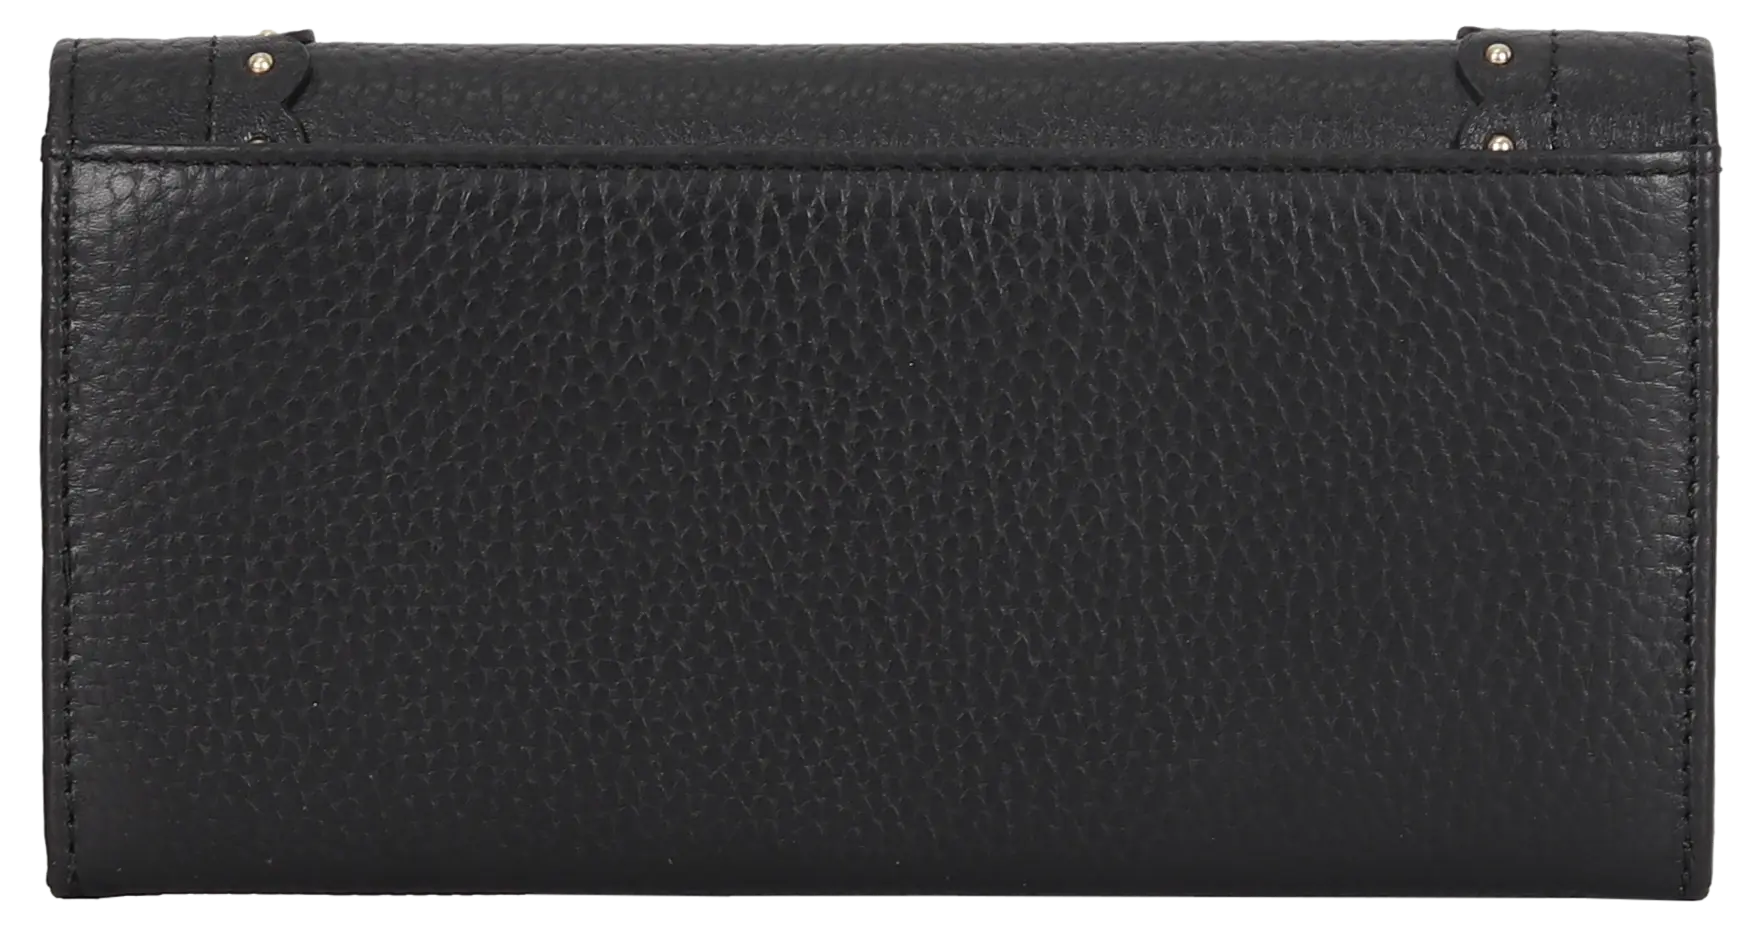 Rugged Earth Women's Leather Purse Women's Wallets Boutique of Leathers/Open Road